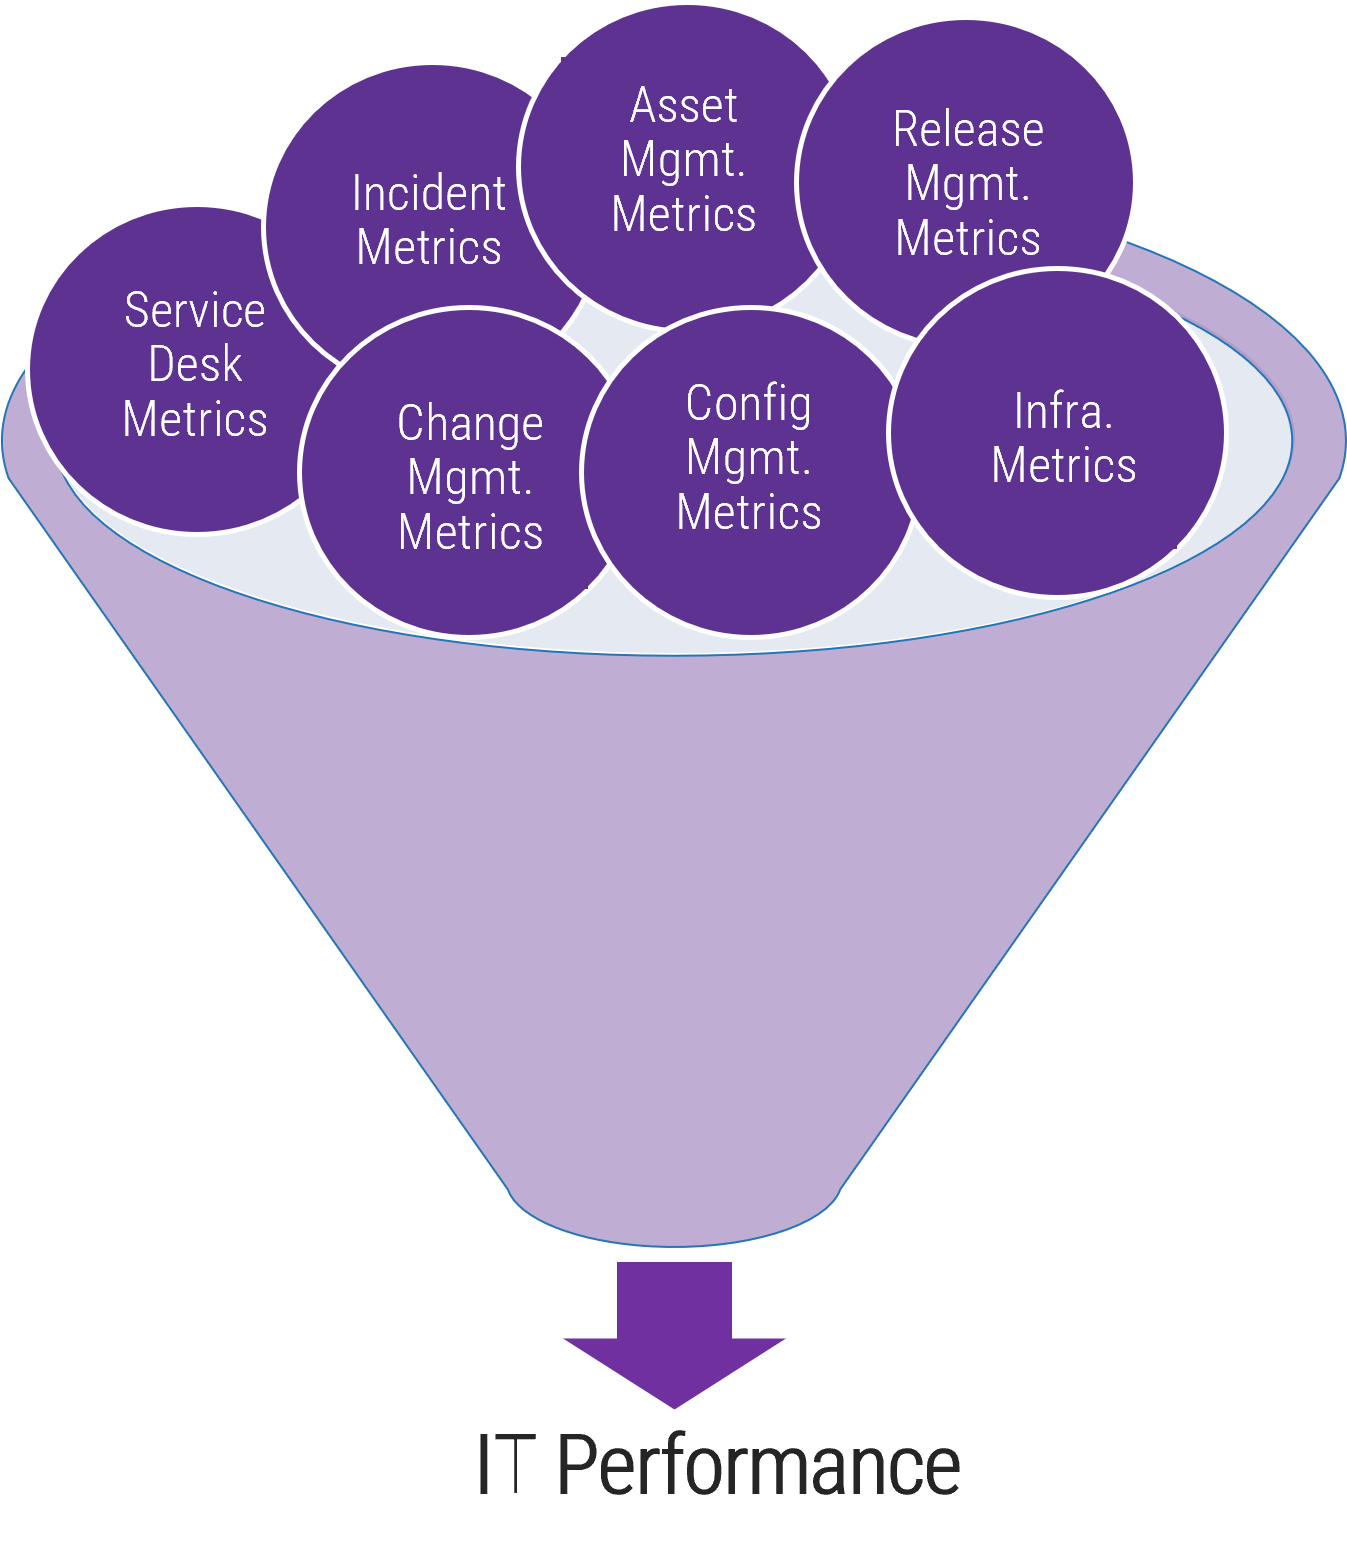 A funnel is shown. The output is IT Performance. The inputs are: Service Desk Metrics; Incident Metrics; Asset Mgmt. Metrics; Release Mgmt. Metrics; Change Mgmt. Metrics; Infra. Metrics